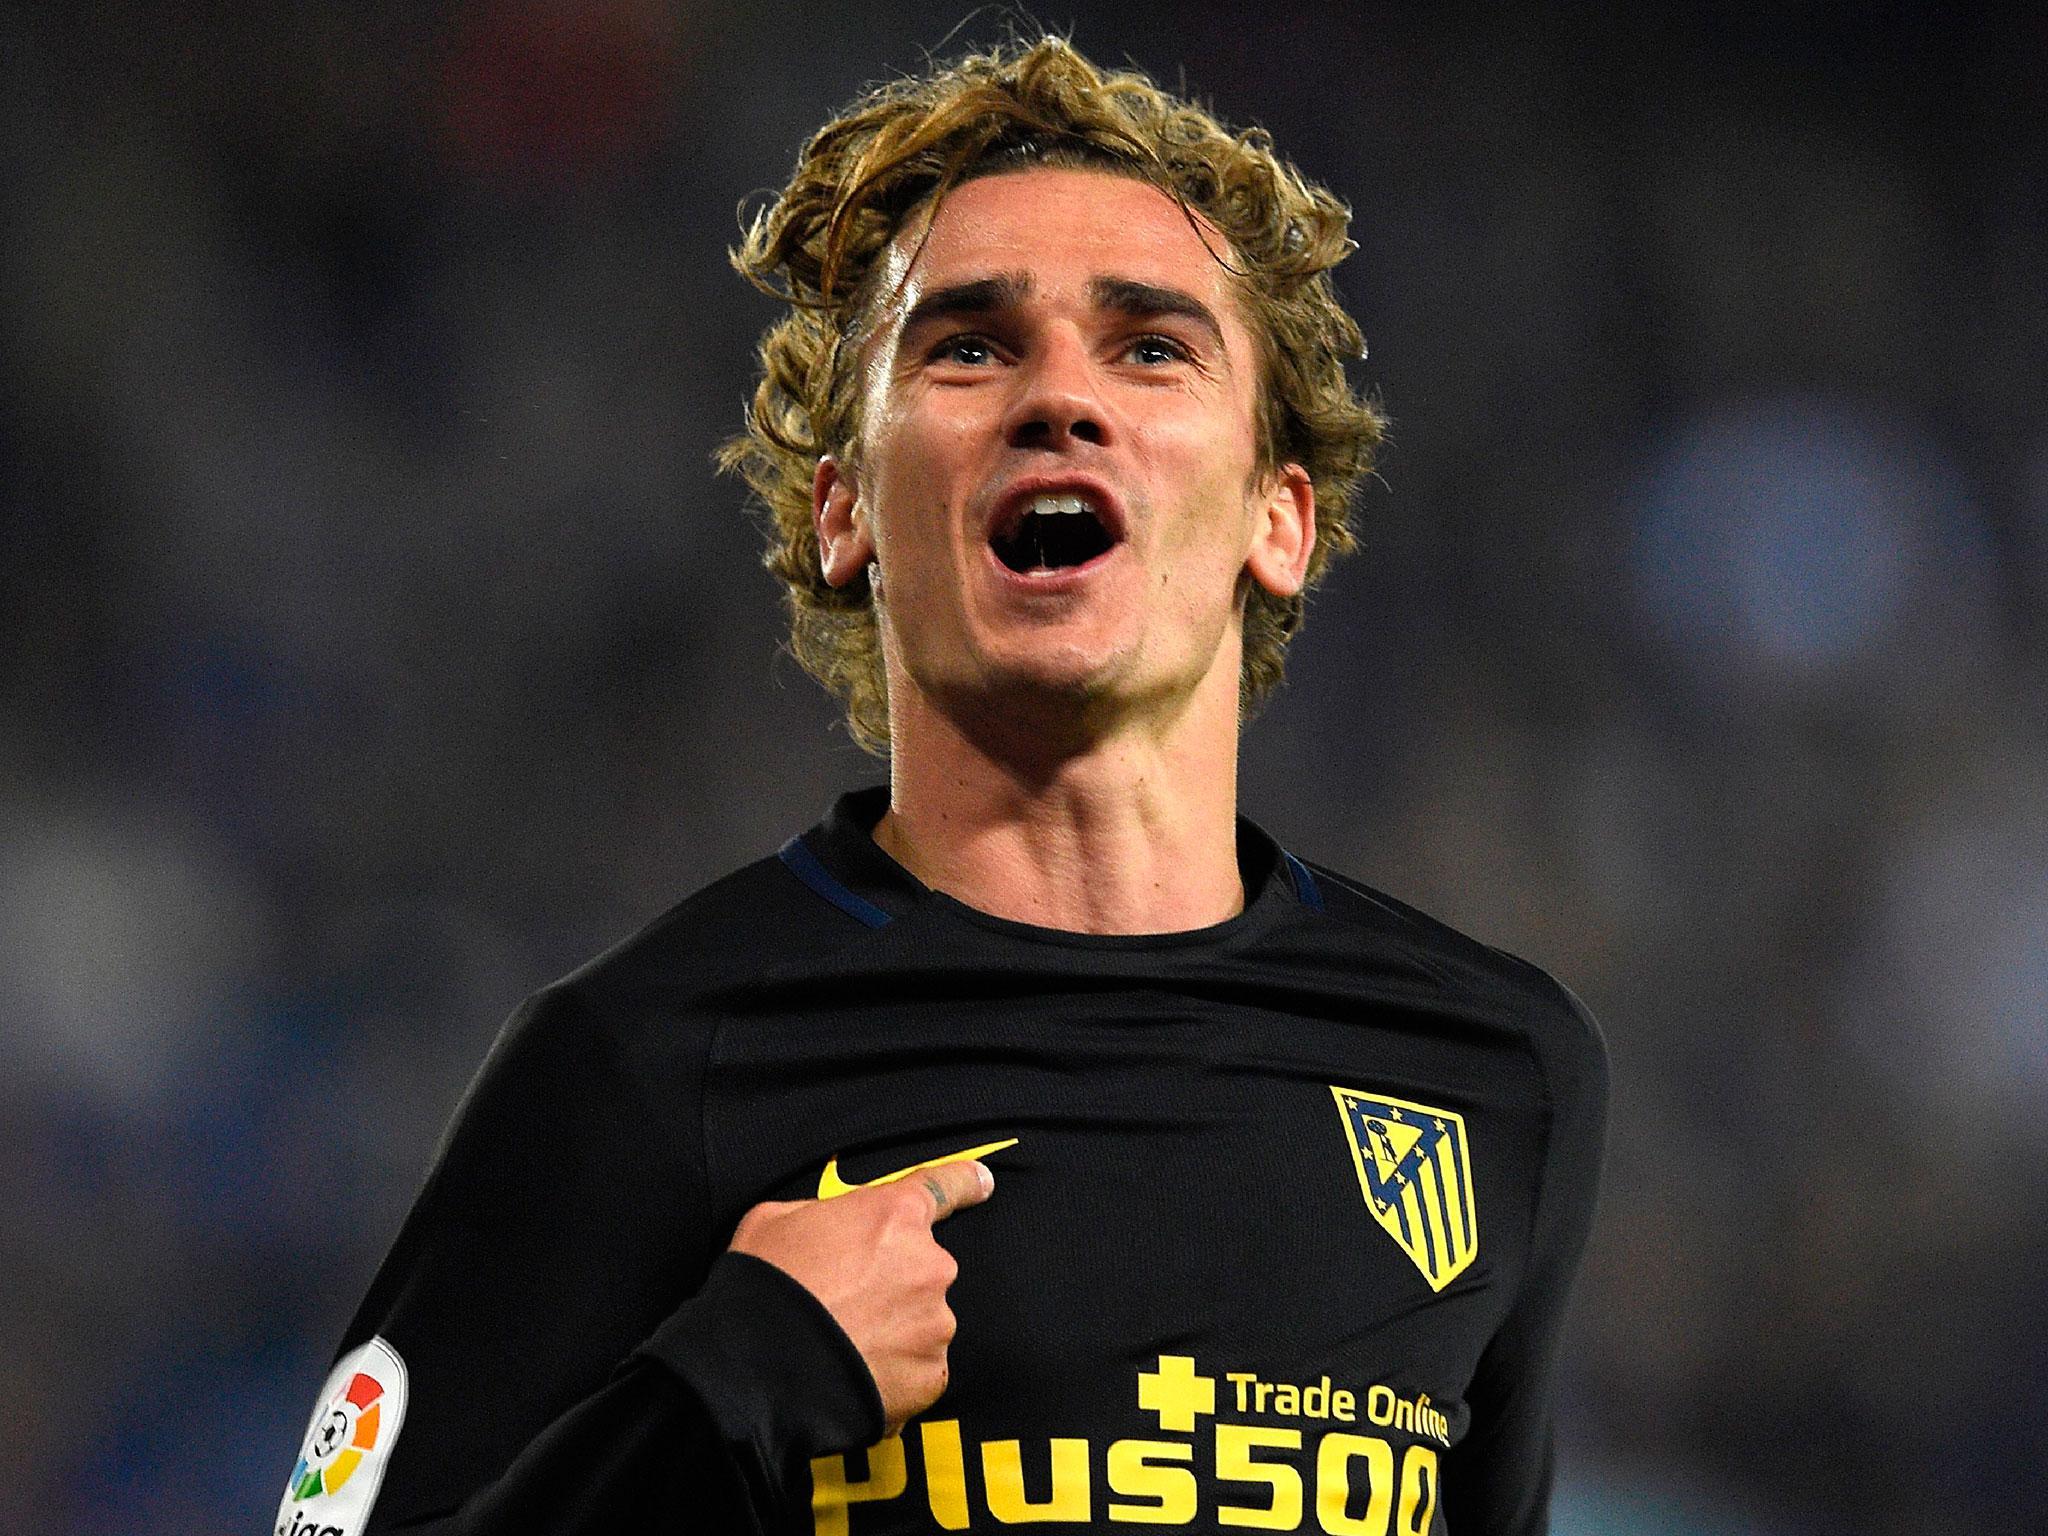 Antoine Griezmann could leave Atletico Madrid this summer